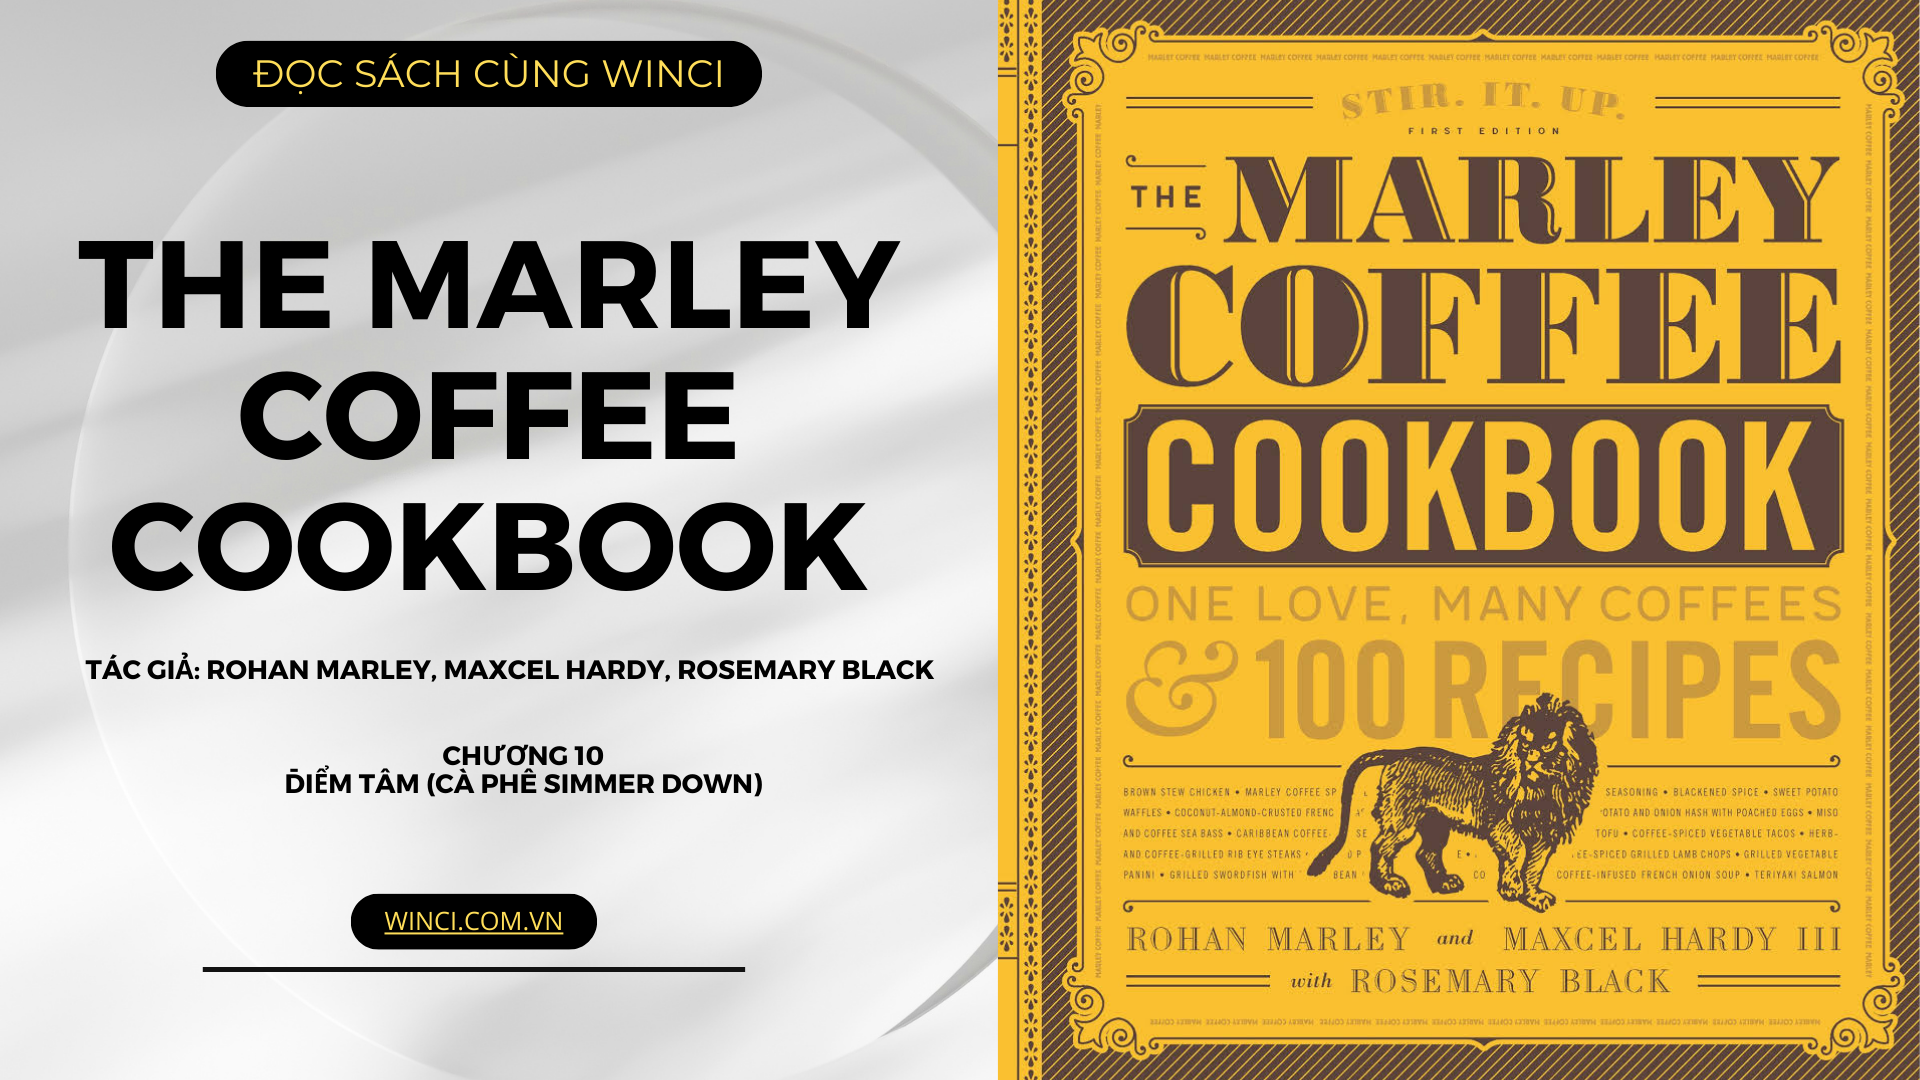 Marley Coffee Cookbook One Love, Many Coffees, And 100 Recipes